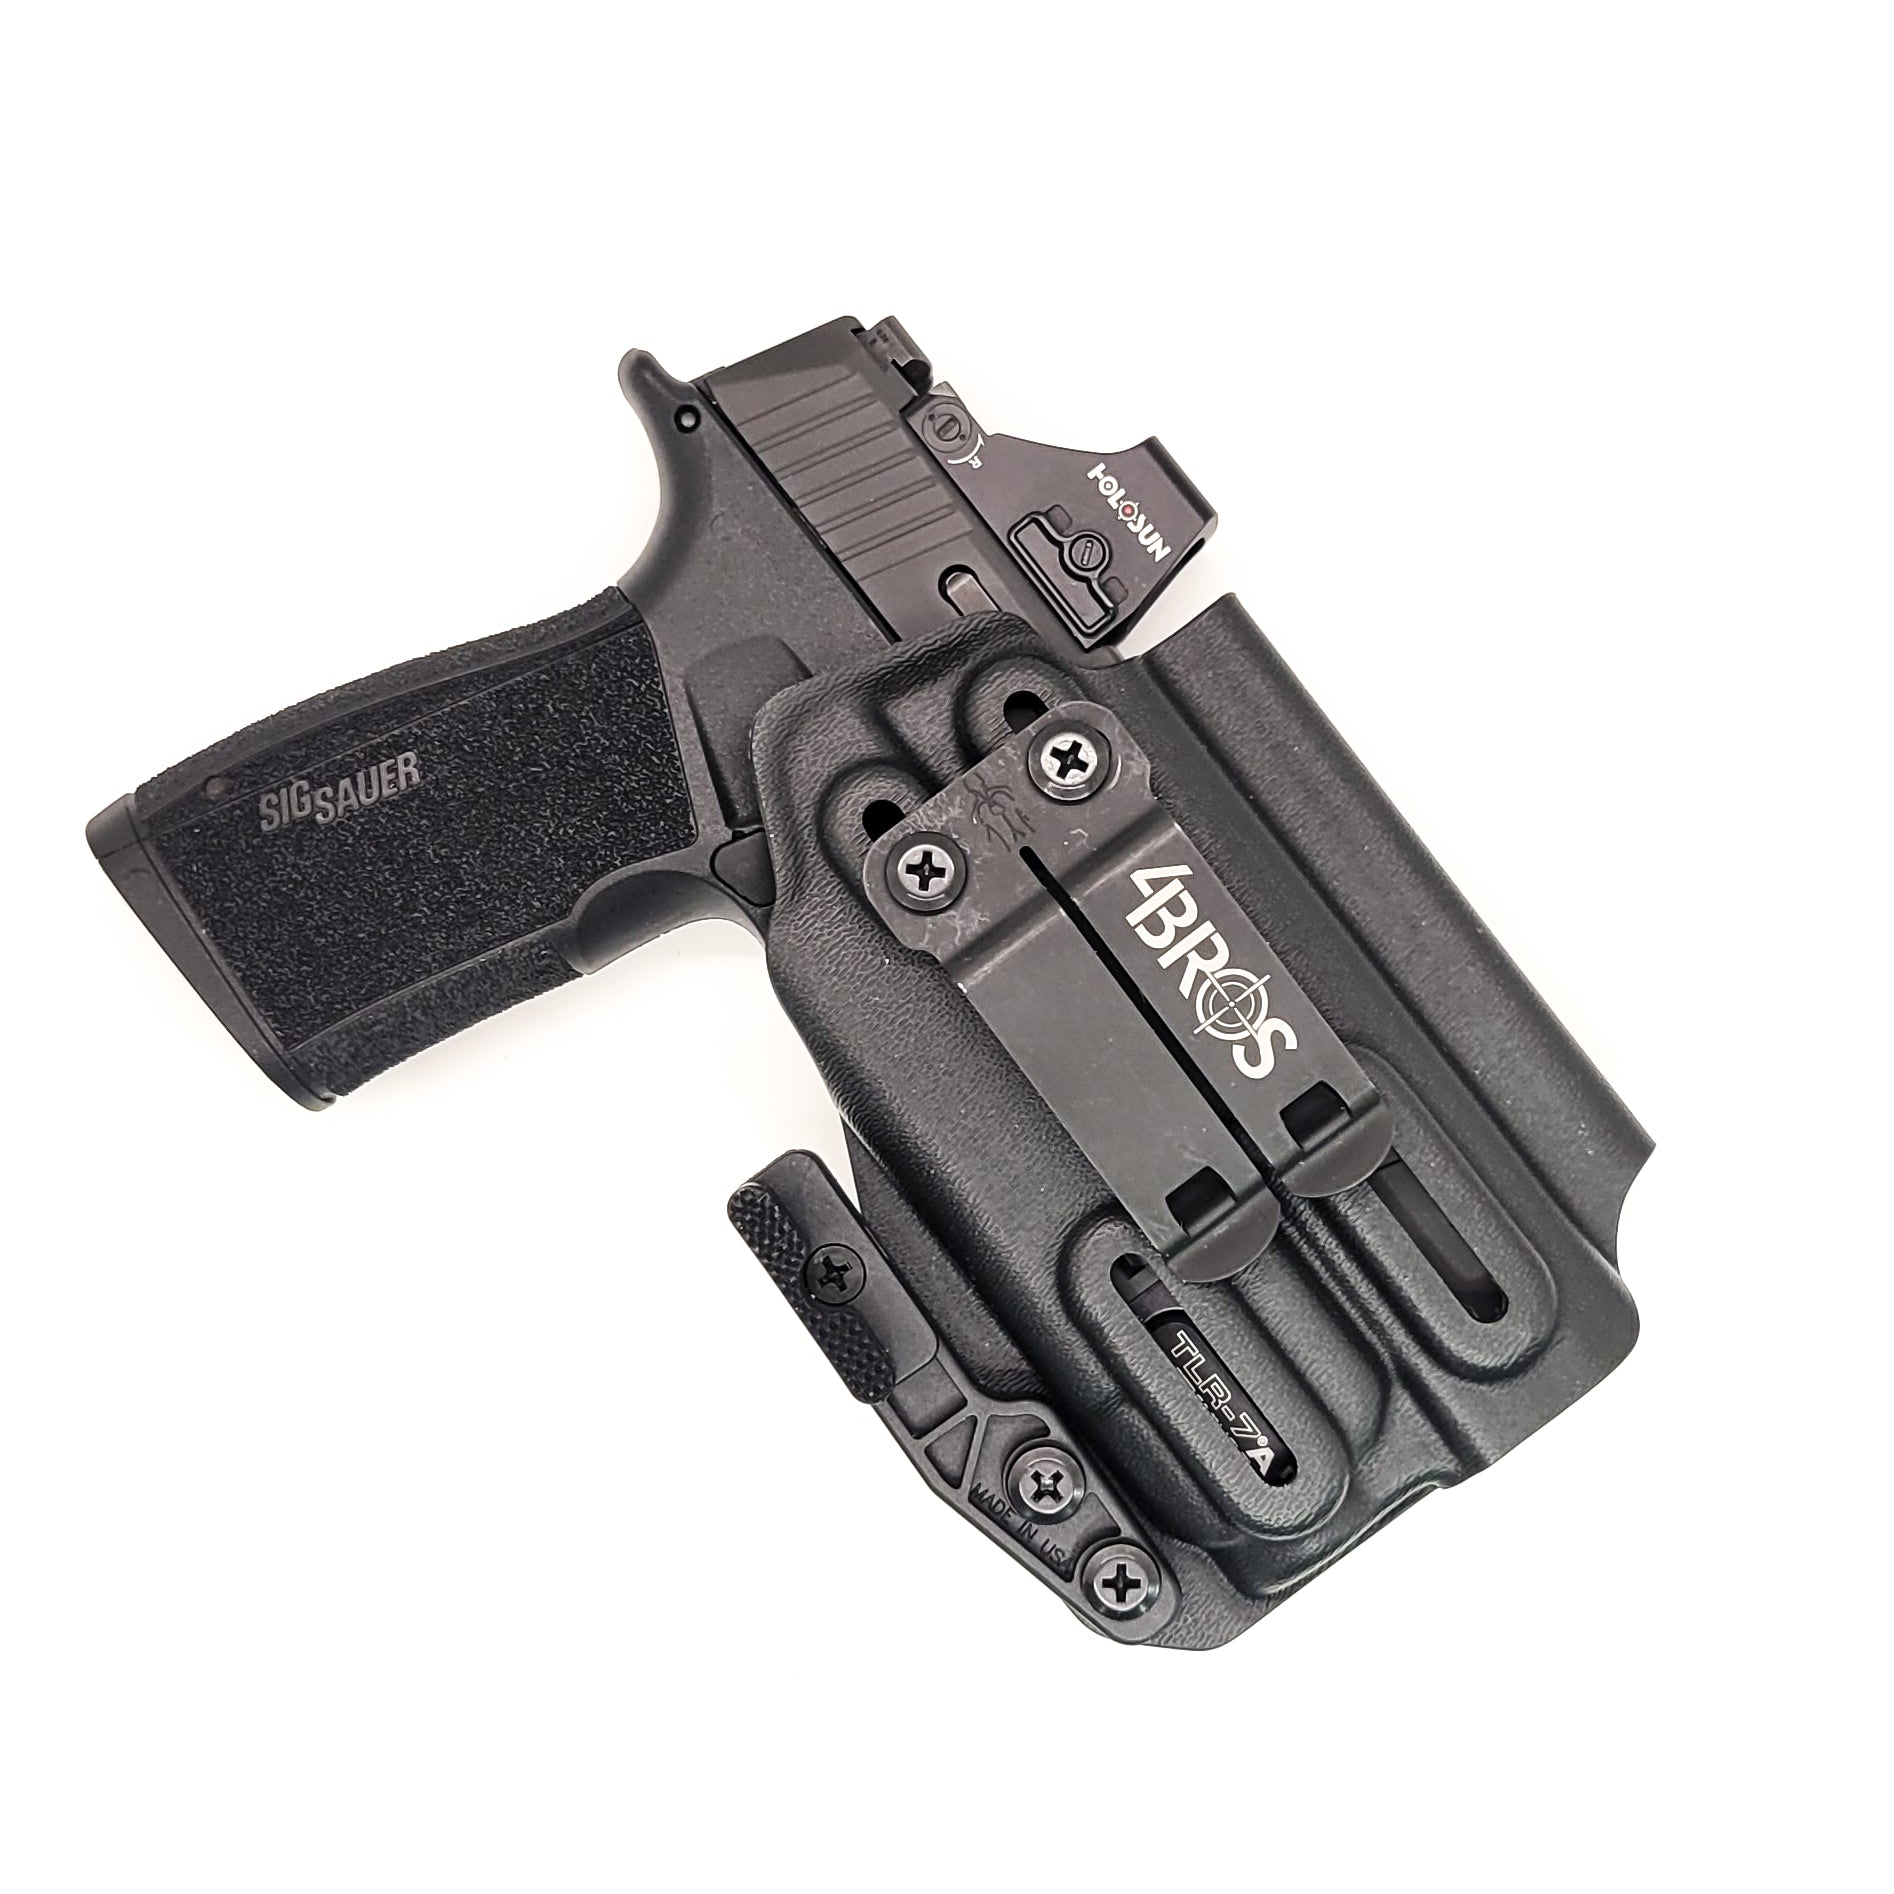 For the best Inside Waistband Kydex Holster designed to fit the Sig Sauer P365-XMACRO COMP ROMEOZERO ELITE with Streamlight TLR-7 or TLR-7A, shop Four Brothers Holsters.  Full sweat guard, adjustable retention, minimal material & smooth edges to reduce printing. Made in the USA. Open muzzle for threaded barrels, cleared for red dot sights.